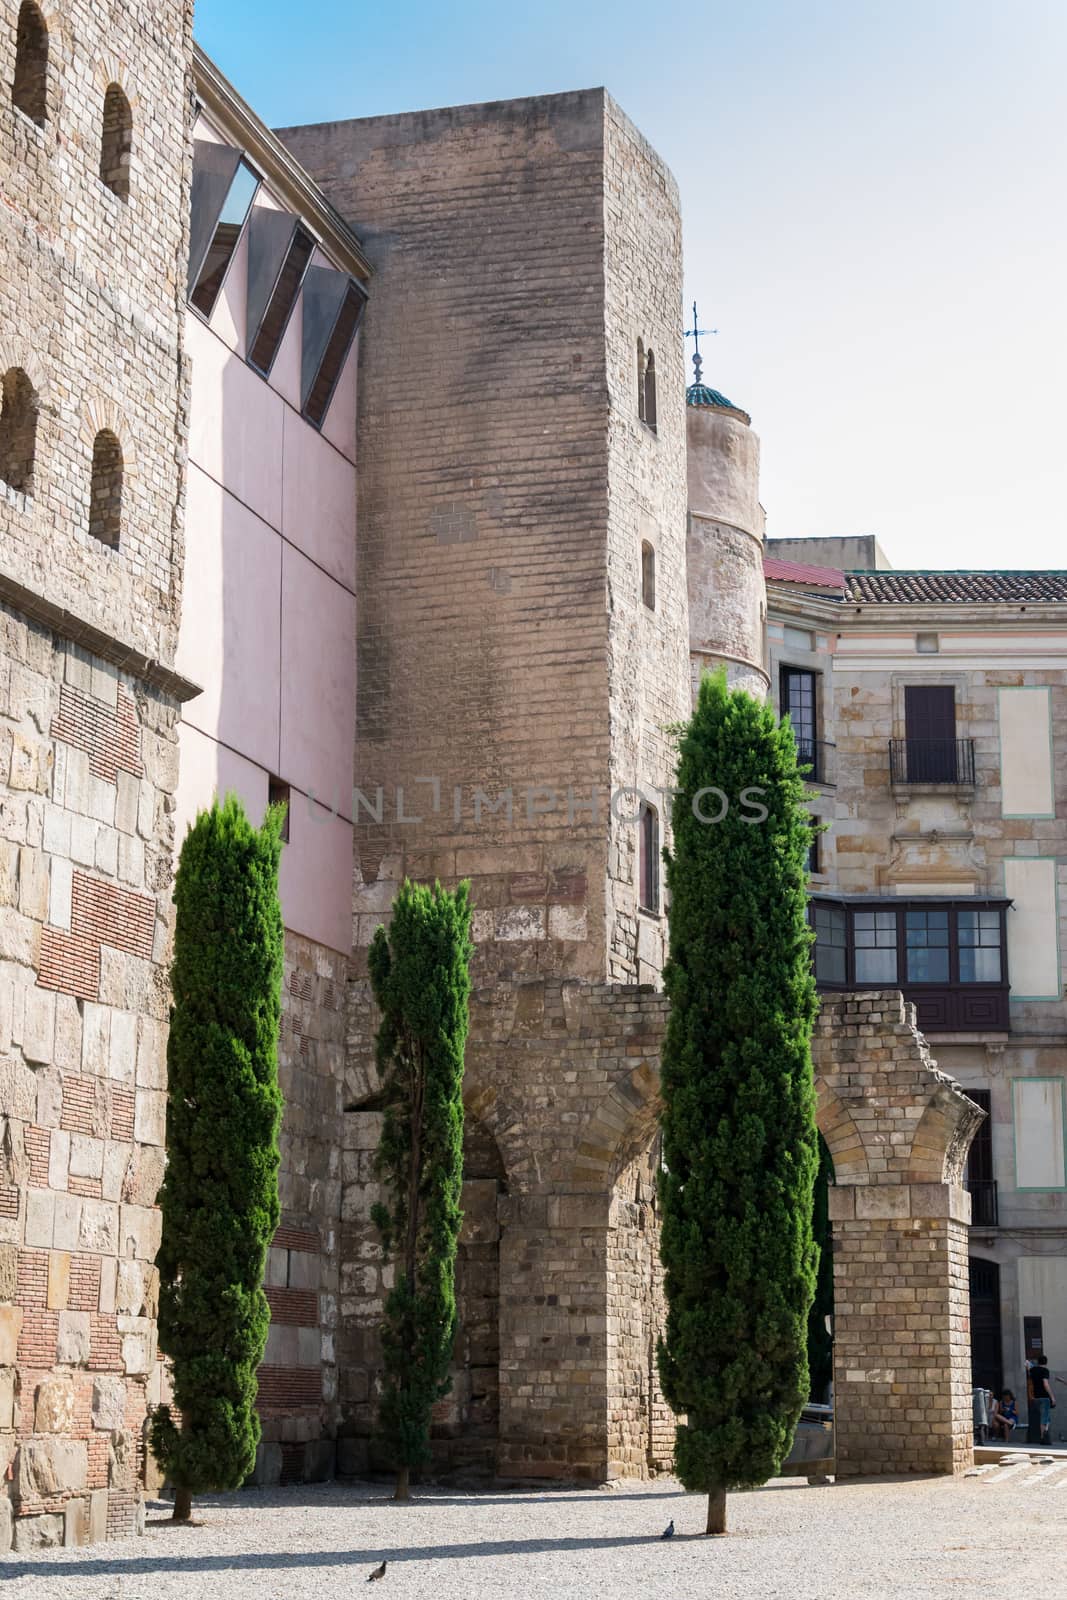 Some buildings in the Gothic quarter of Barcelona by enrico.lapponi